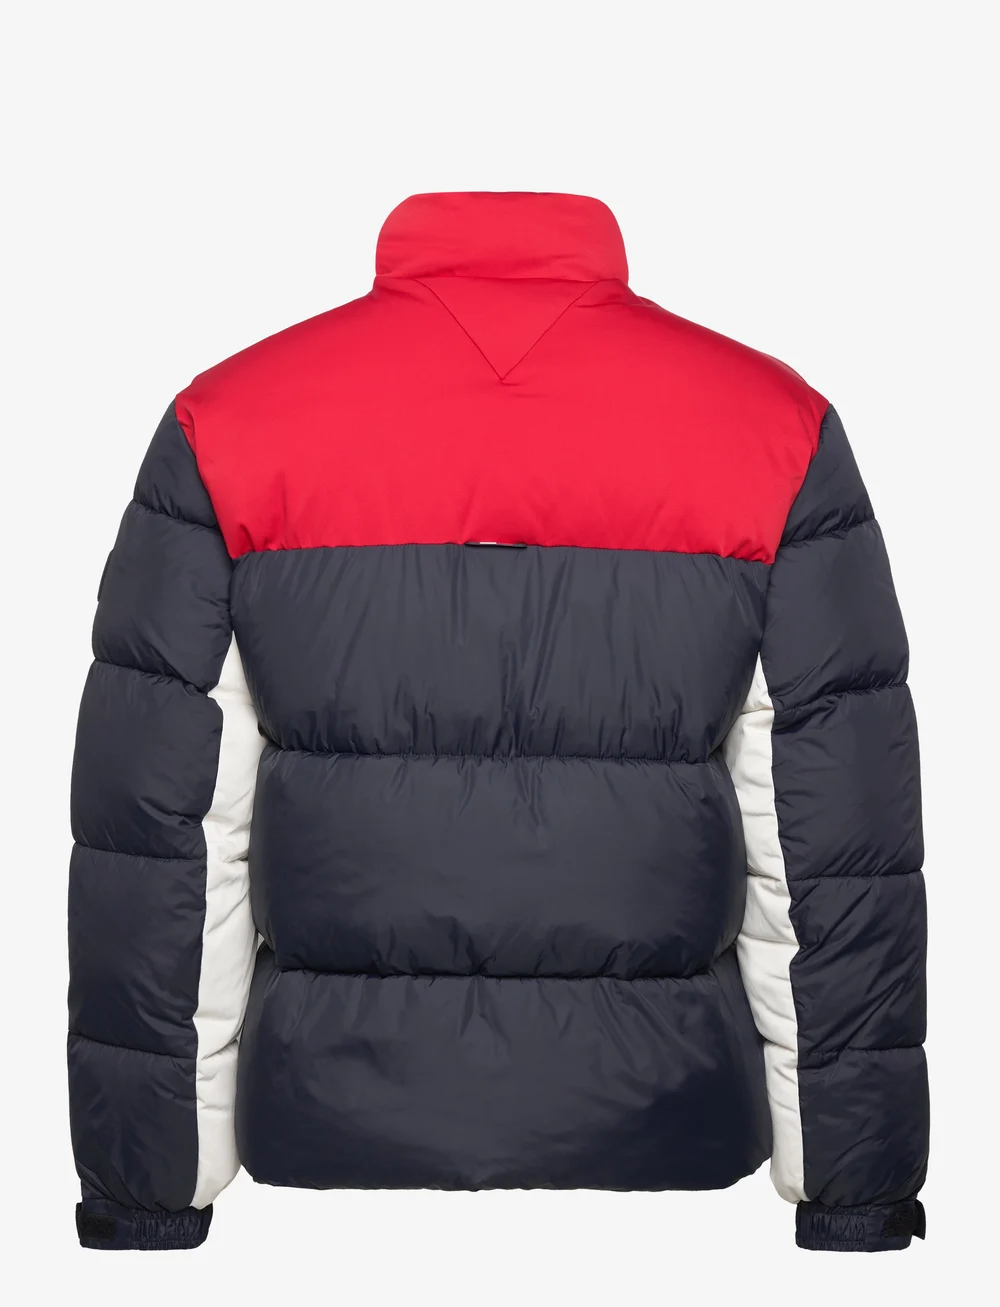 kant bypass Stratford på Avon Tommy Hilfiger New York Puffer Jacket - 299.90 €. Buy Padded jackets from Tommy  Hilfiger online at Boozt.com. Fast delivery and easy returns